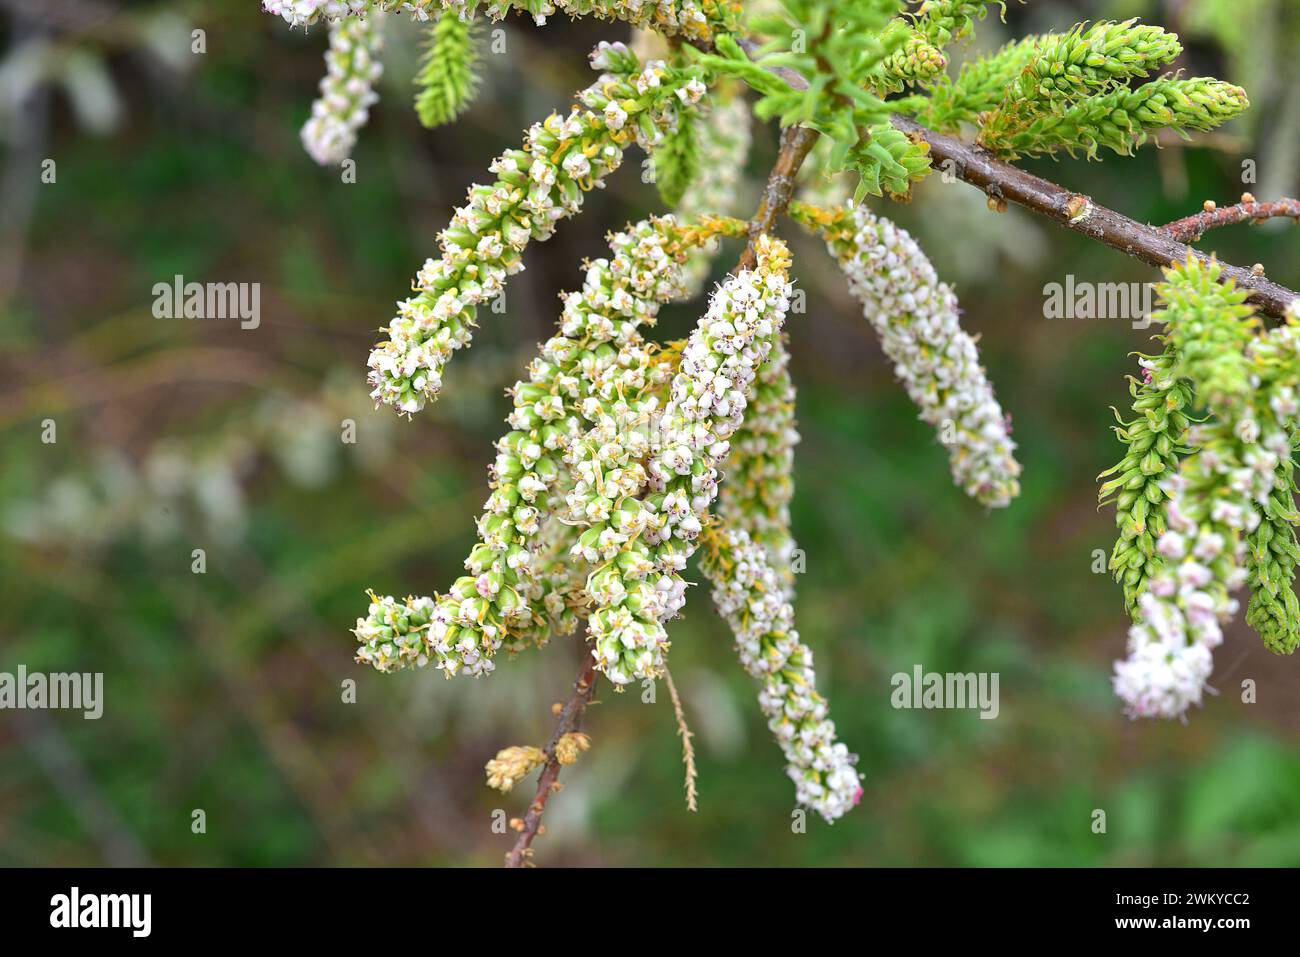 Taray o atarfe (Tamarix boveana) is a shrub or small tree native to eastern Spain and north Africa. Flowers and immature fruits detail. Stock Photo